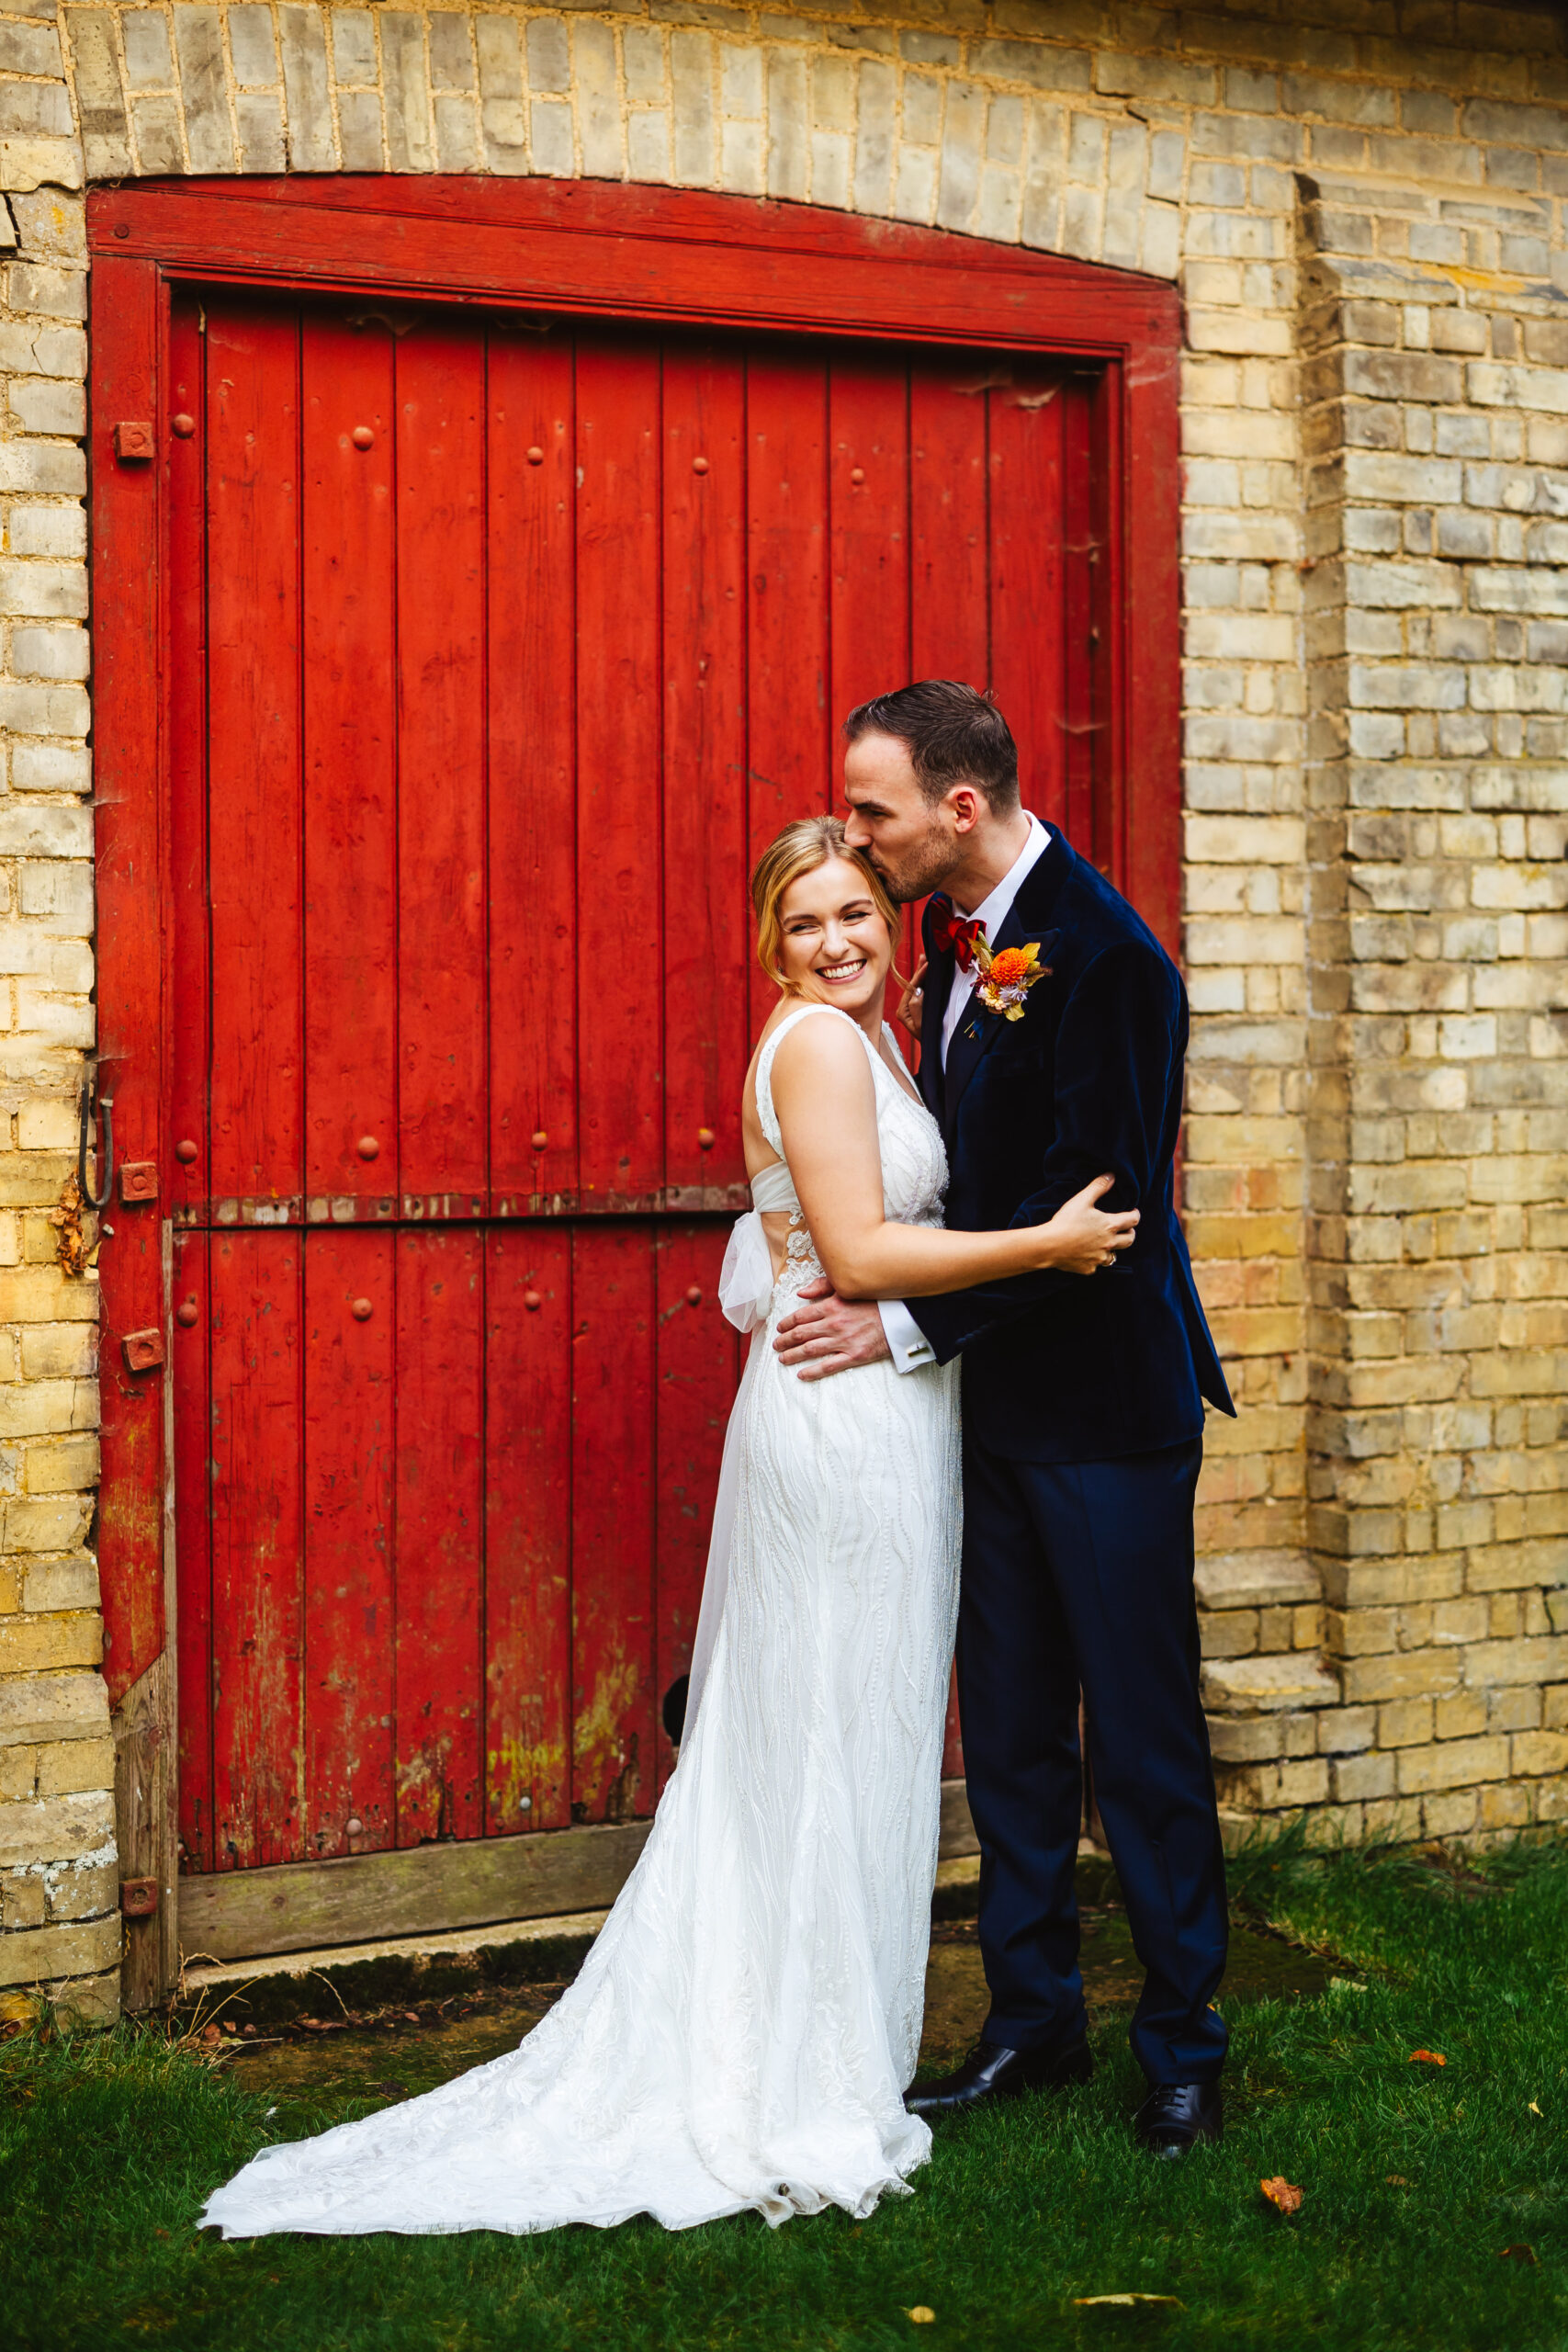 bride and groom stood close together in front of red barn door, groom is kissing bride on forehead at south farm 